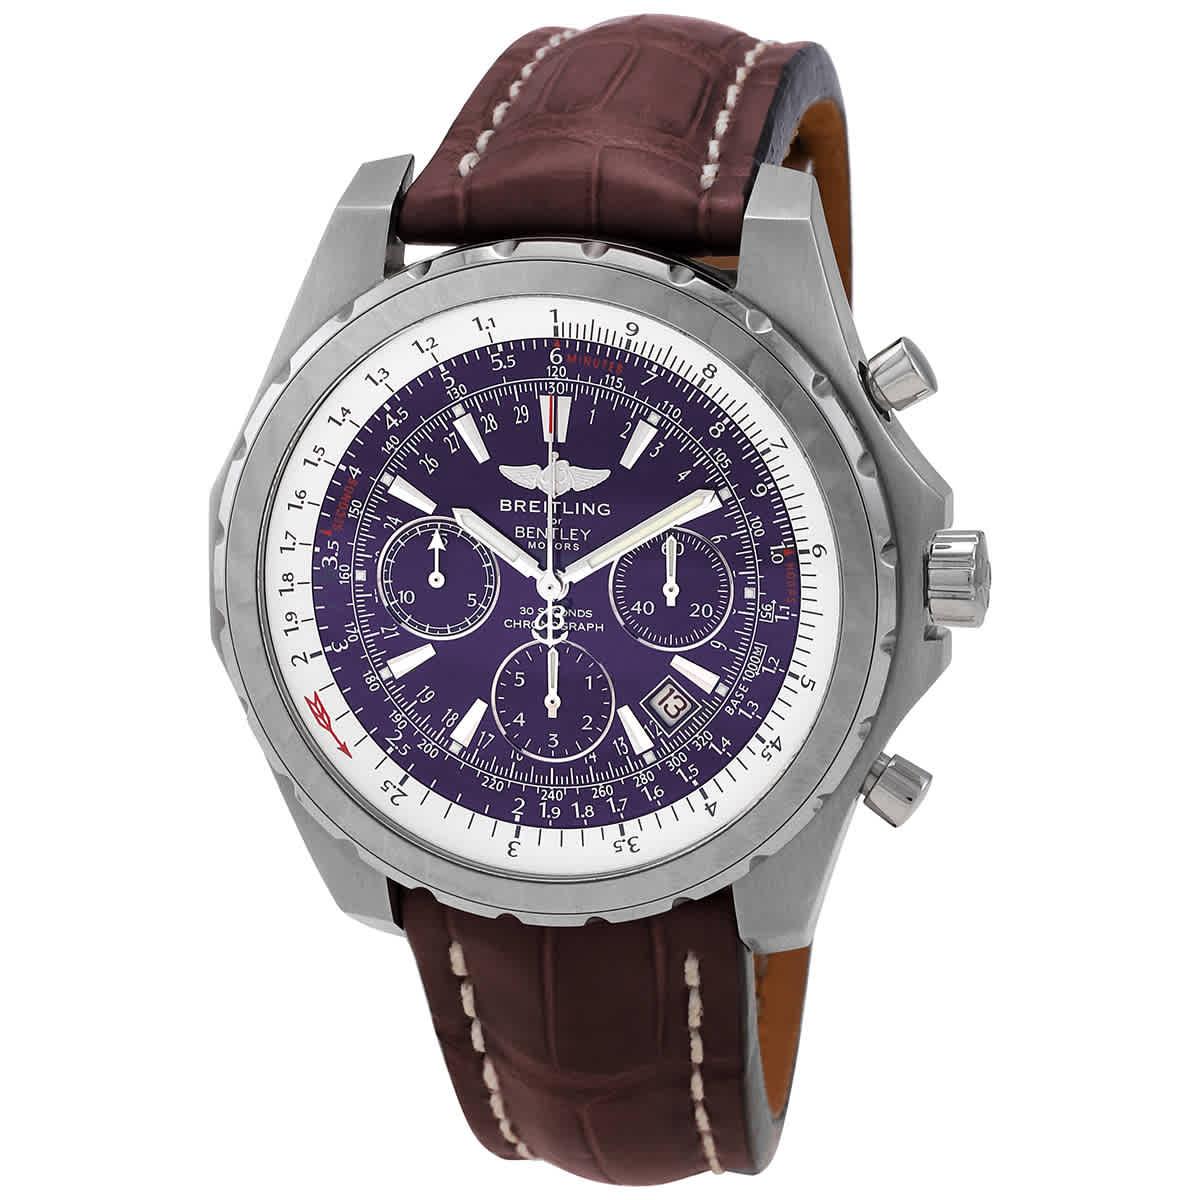 Breitling for Bentley Royal Ebony for C$5,317 for sale from a